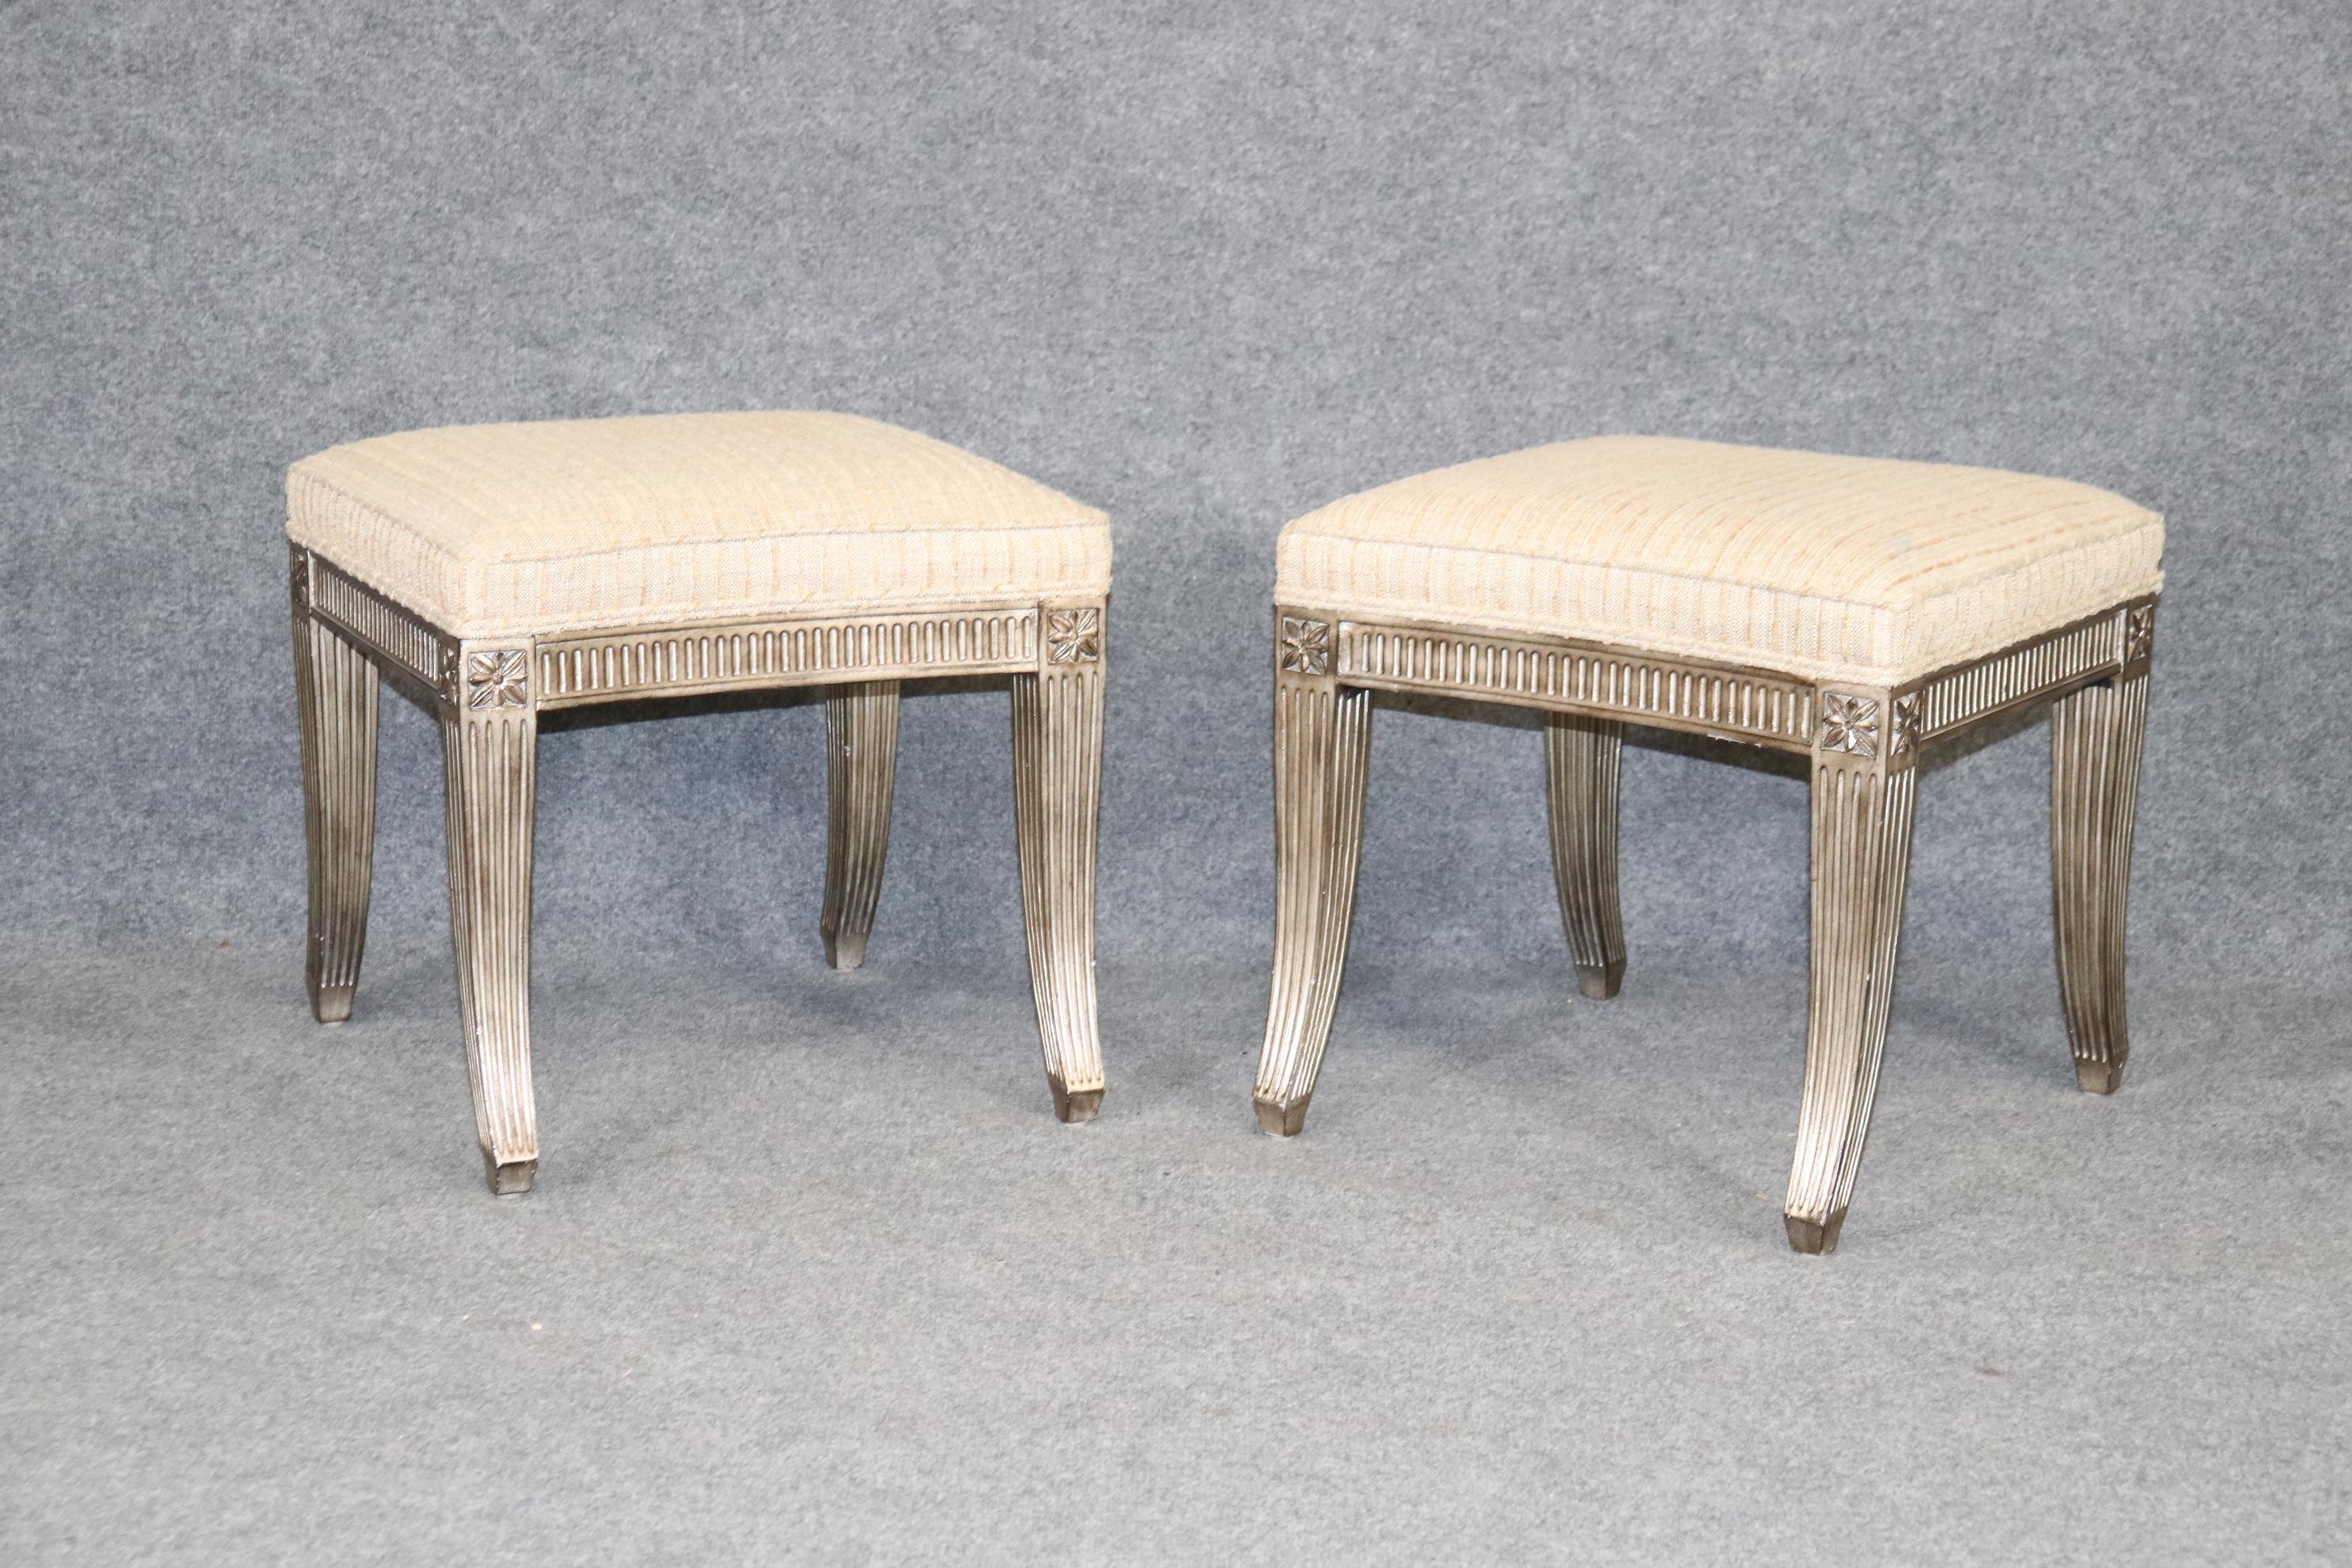 This is a beautiful and glamorous pair of silver leaf directoire benches or stools. They are perfect to add a touch of glamor that you may be missing in your home. They each measure 20 x 19 x 20 tall and are in good vintage condition. They will show